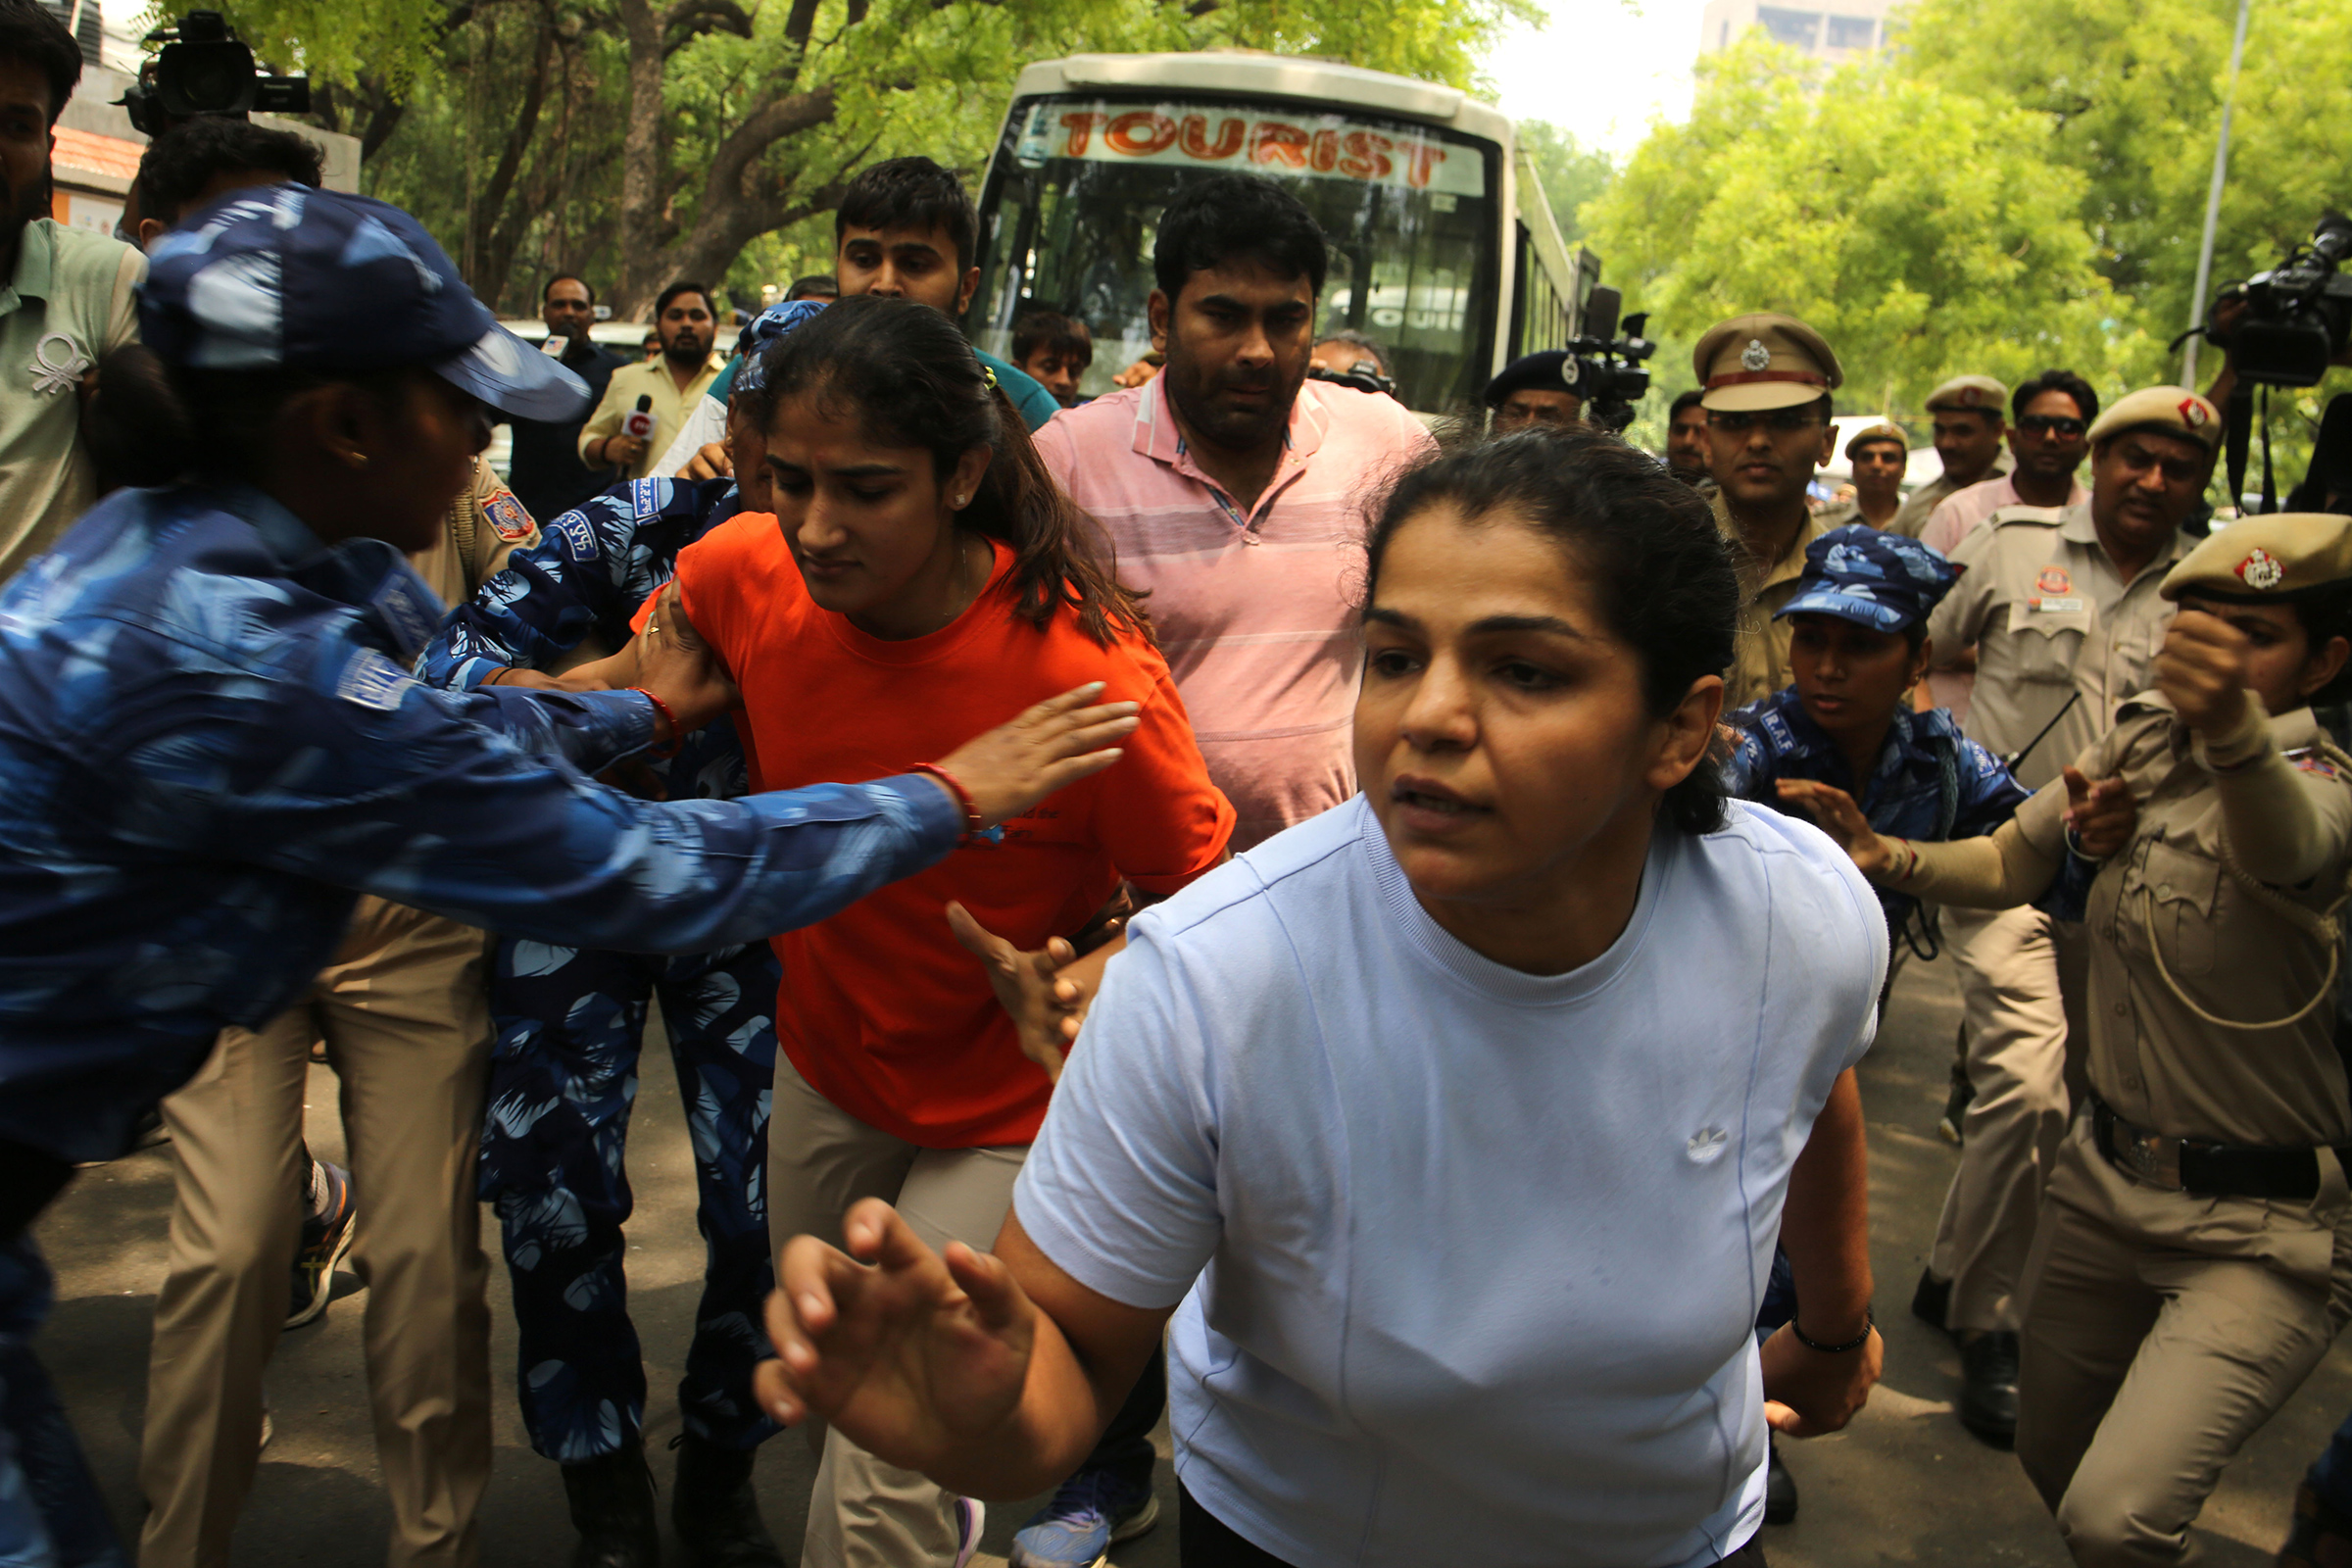 Wrestlers Sakshi Malik, Vinesh Phogat, and Bajrang Punia, along with supporters march toward India's parliament on May 28. (Salman Ali—Hindustan Times/Getty Images)